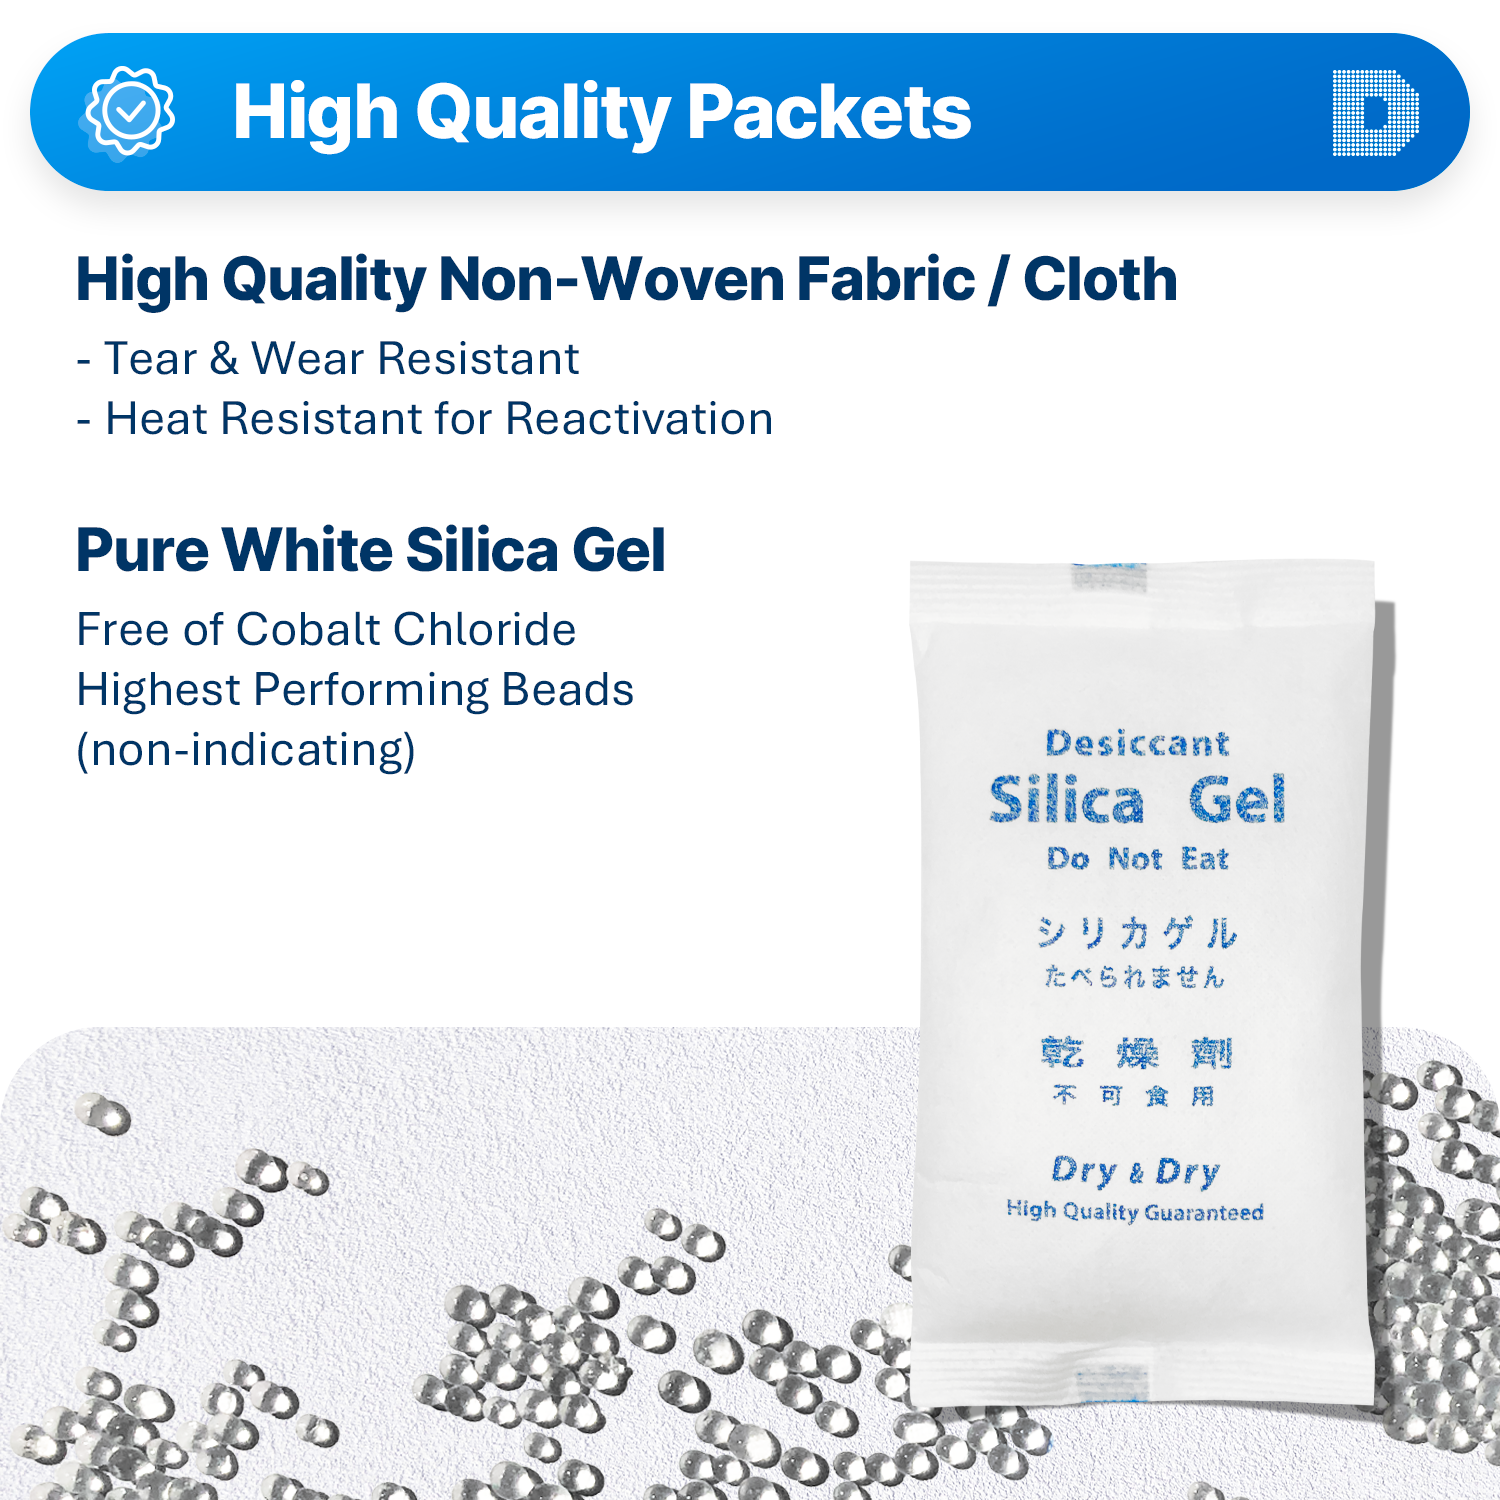 400 Gram [50 Packets]  "Dry & Dry" High Quality Pure Silica Gel Desiccant Packets - Rechargeable Fabric